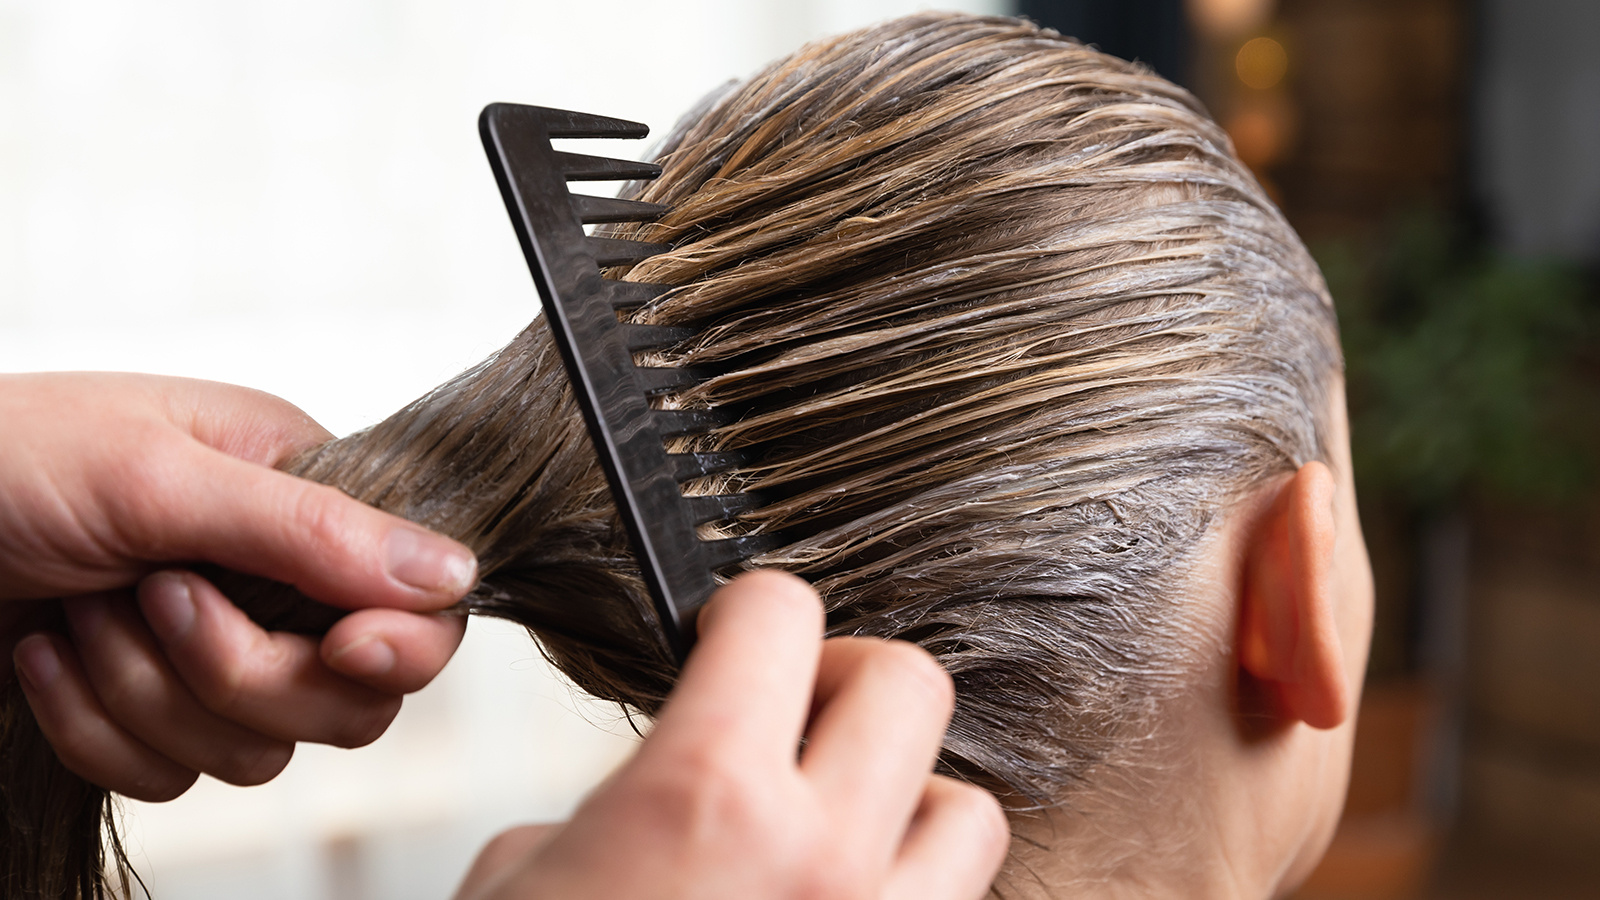 Hairdresser doing treatment after applying hair coloring , hair dye for a blonde women at home or salon.